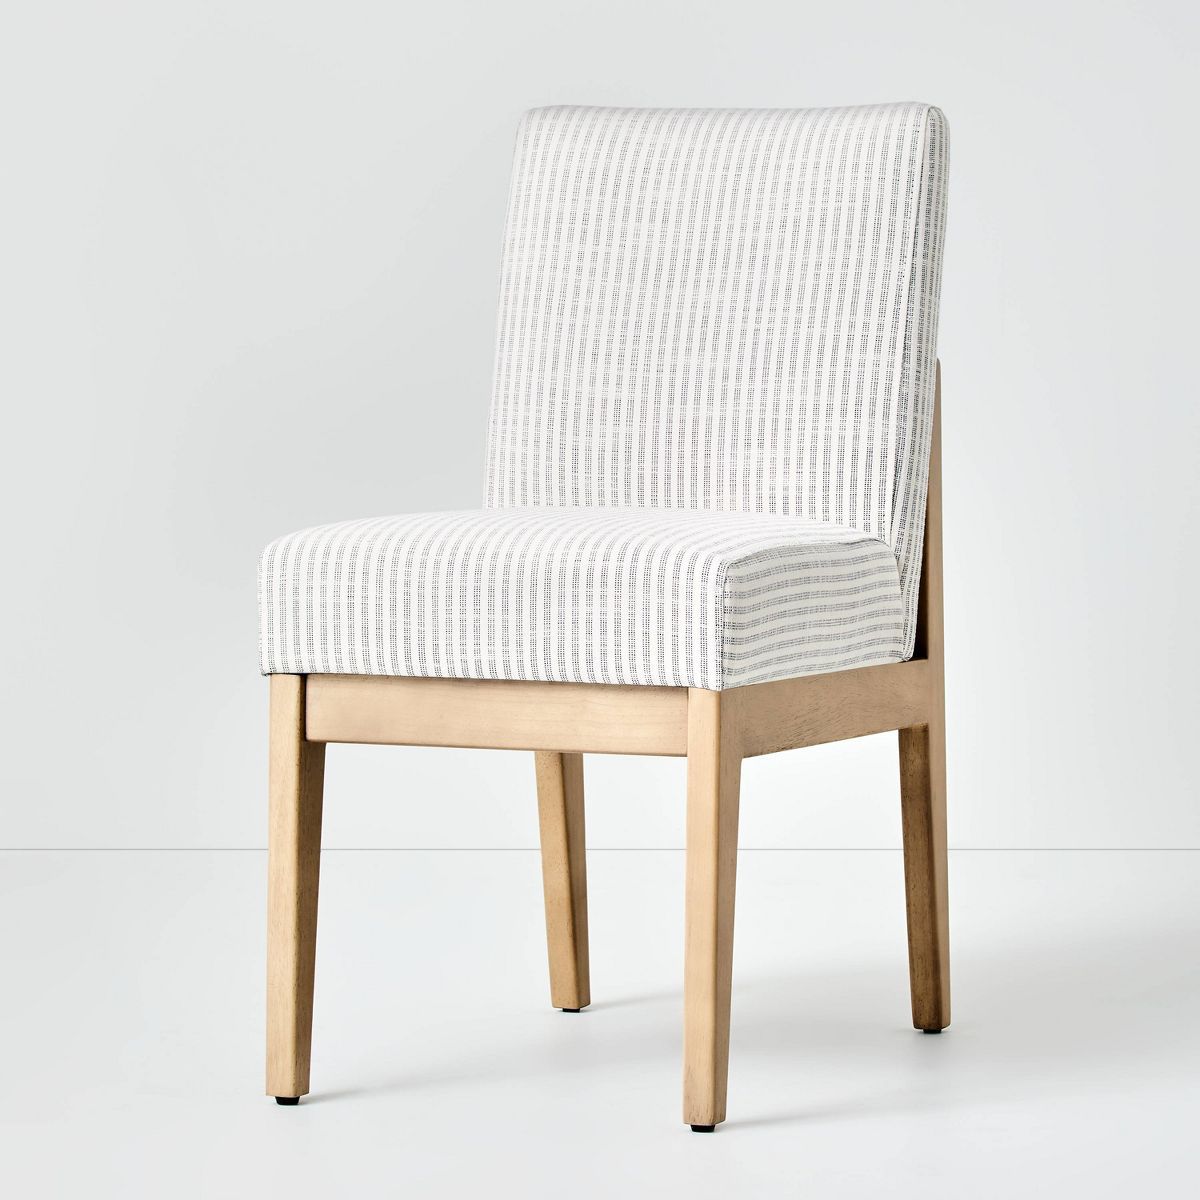 Upholstered Natural Wood Slipper Dining Chair - Hearth & Hand™ with Magnolia | Target